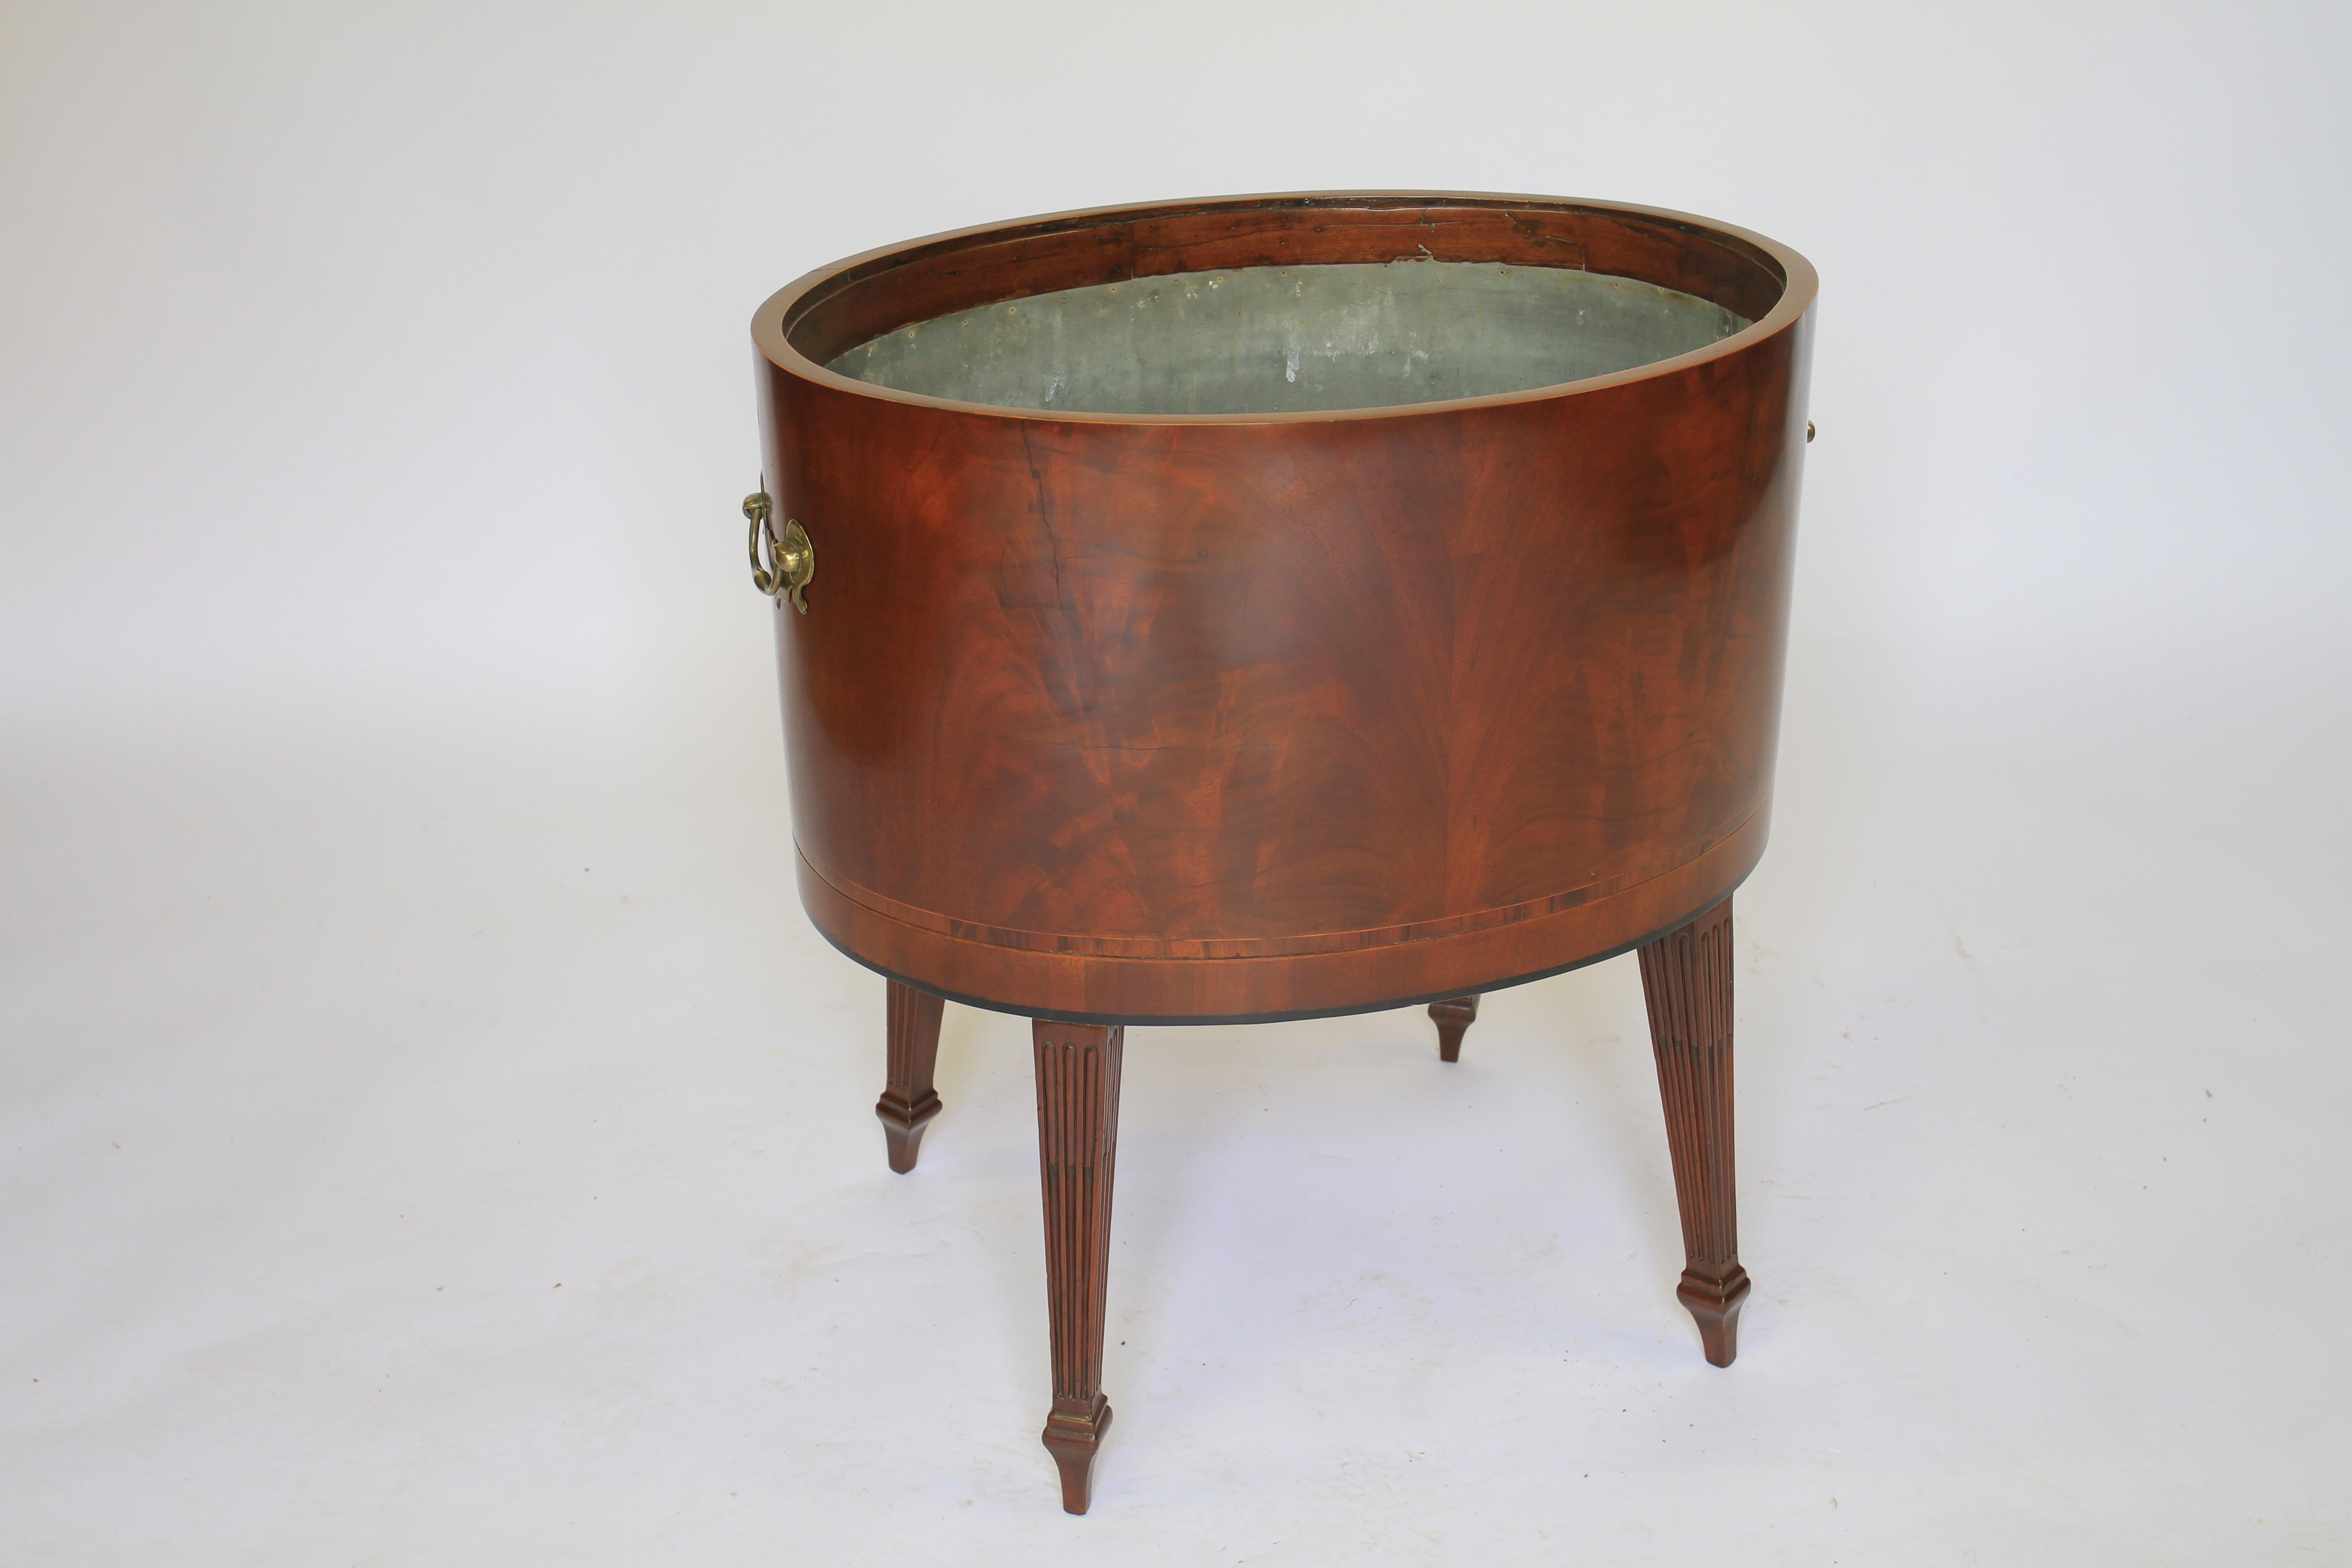 Regency Mahogany oval wine cooler
Open top,
Tinned interior inner Height :28cm
Figured mahogany with banded inlay
Pair Brass carry handles each side
Standing on 4 reeded tapering legs 
